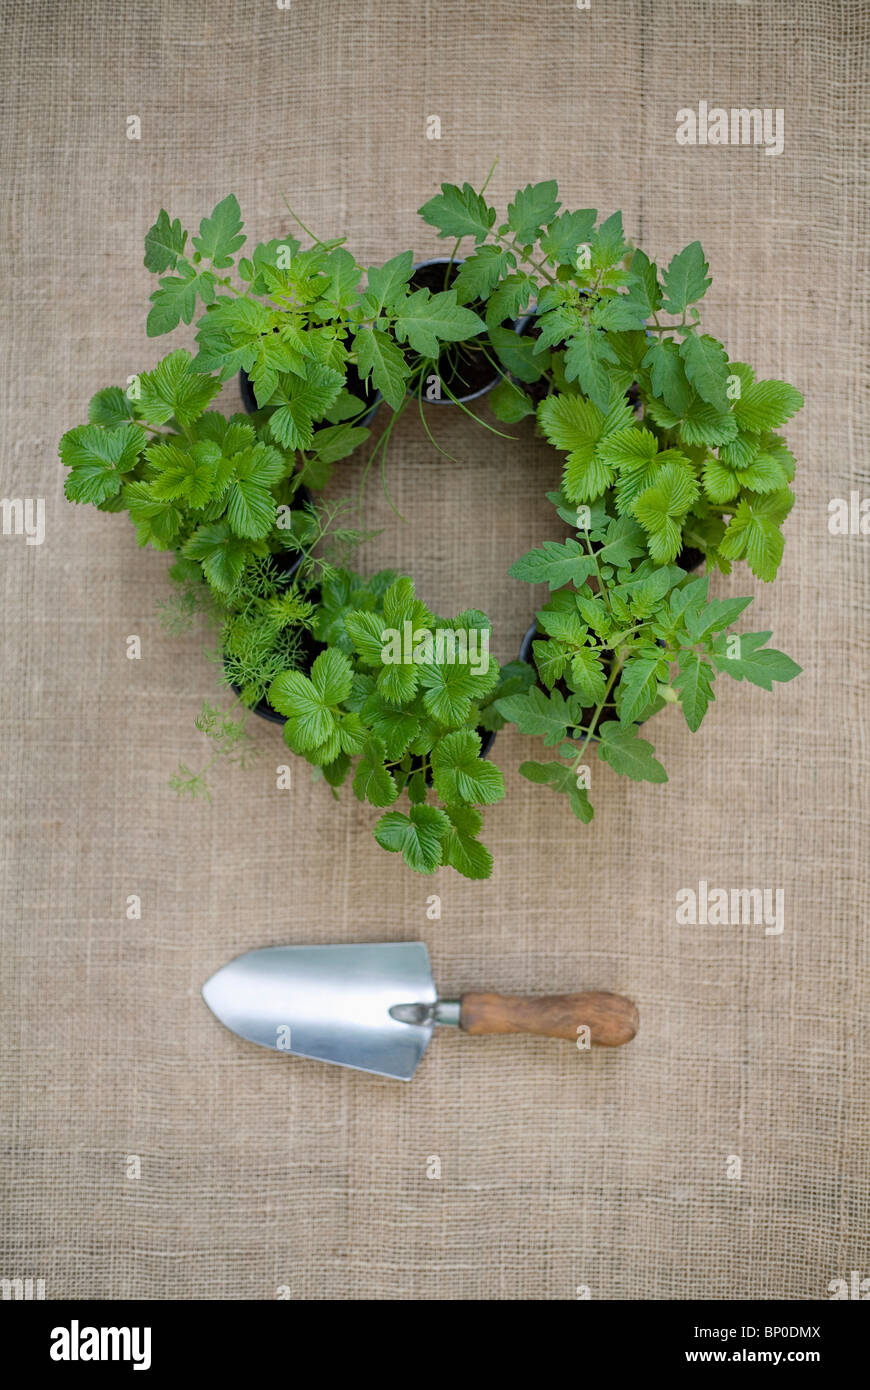 Herbs and plants with gardening trowel Stock Photo